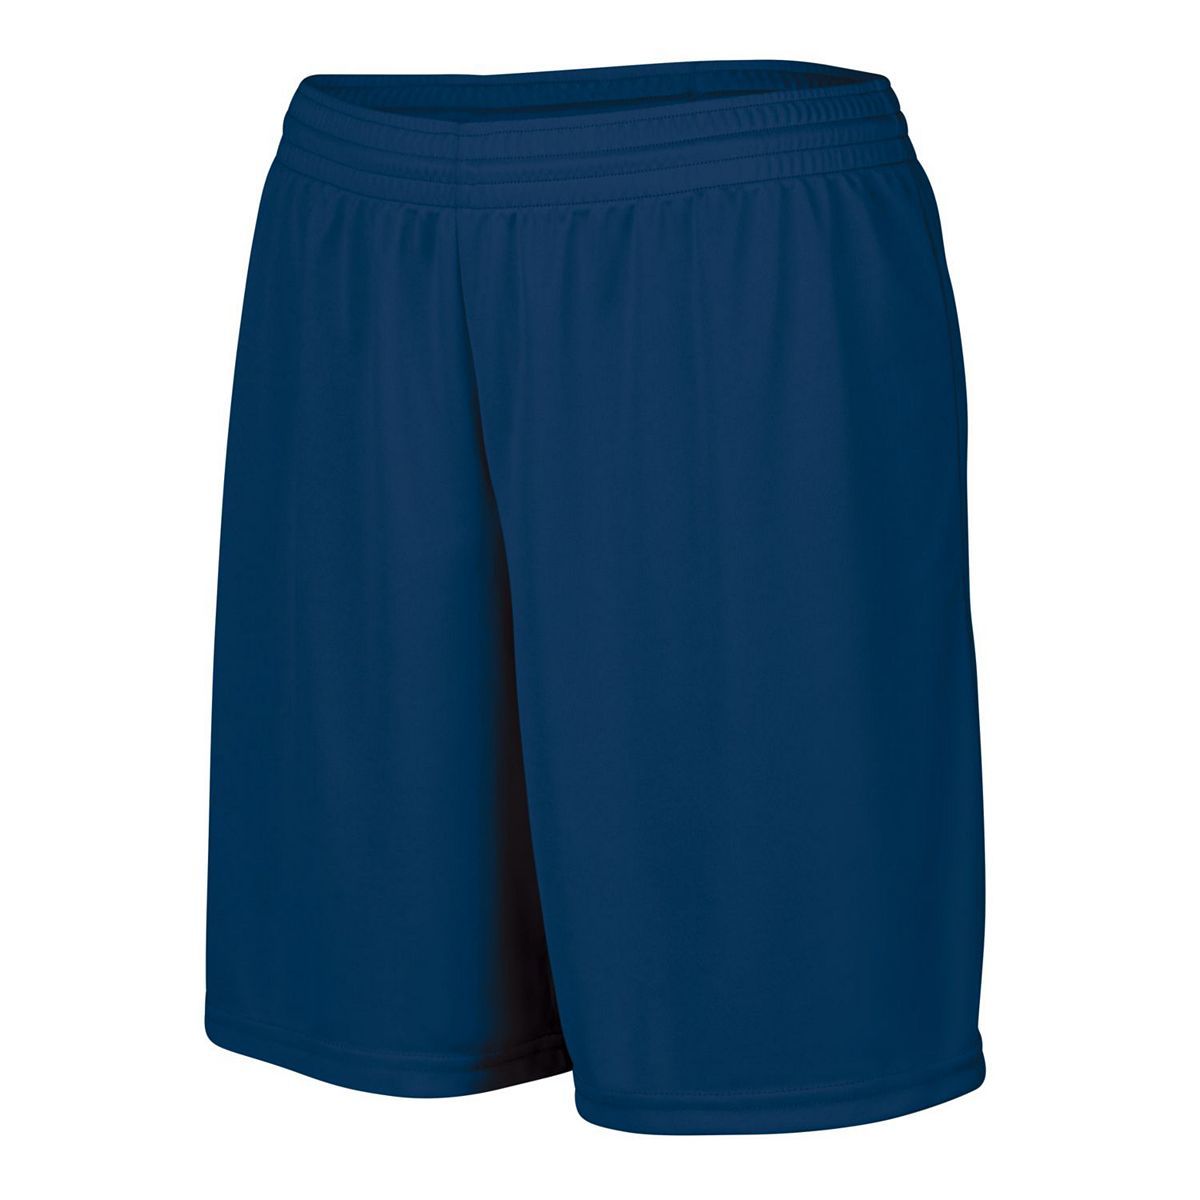 Augusta Sportswear Girls Octane Shorts in Navy  -Part of the Girls, Augusta-Products, Girls-Shorts product lines at KanaleyCreations.com